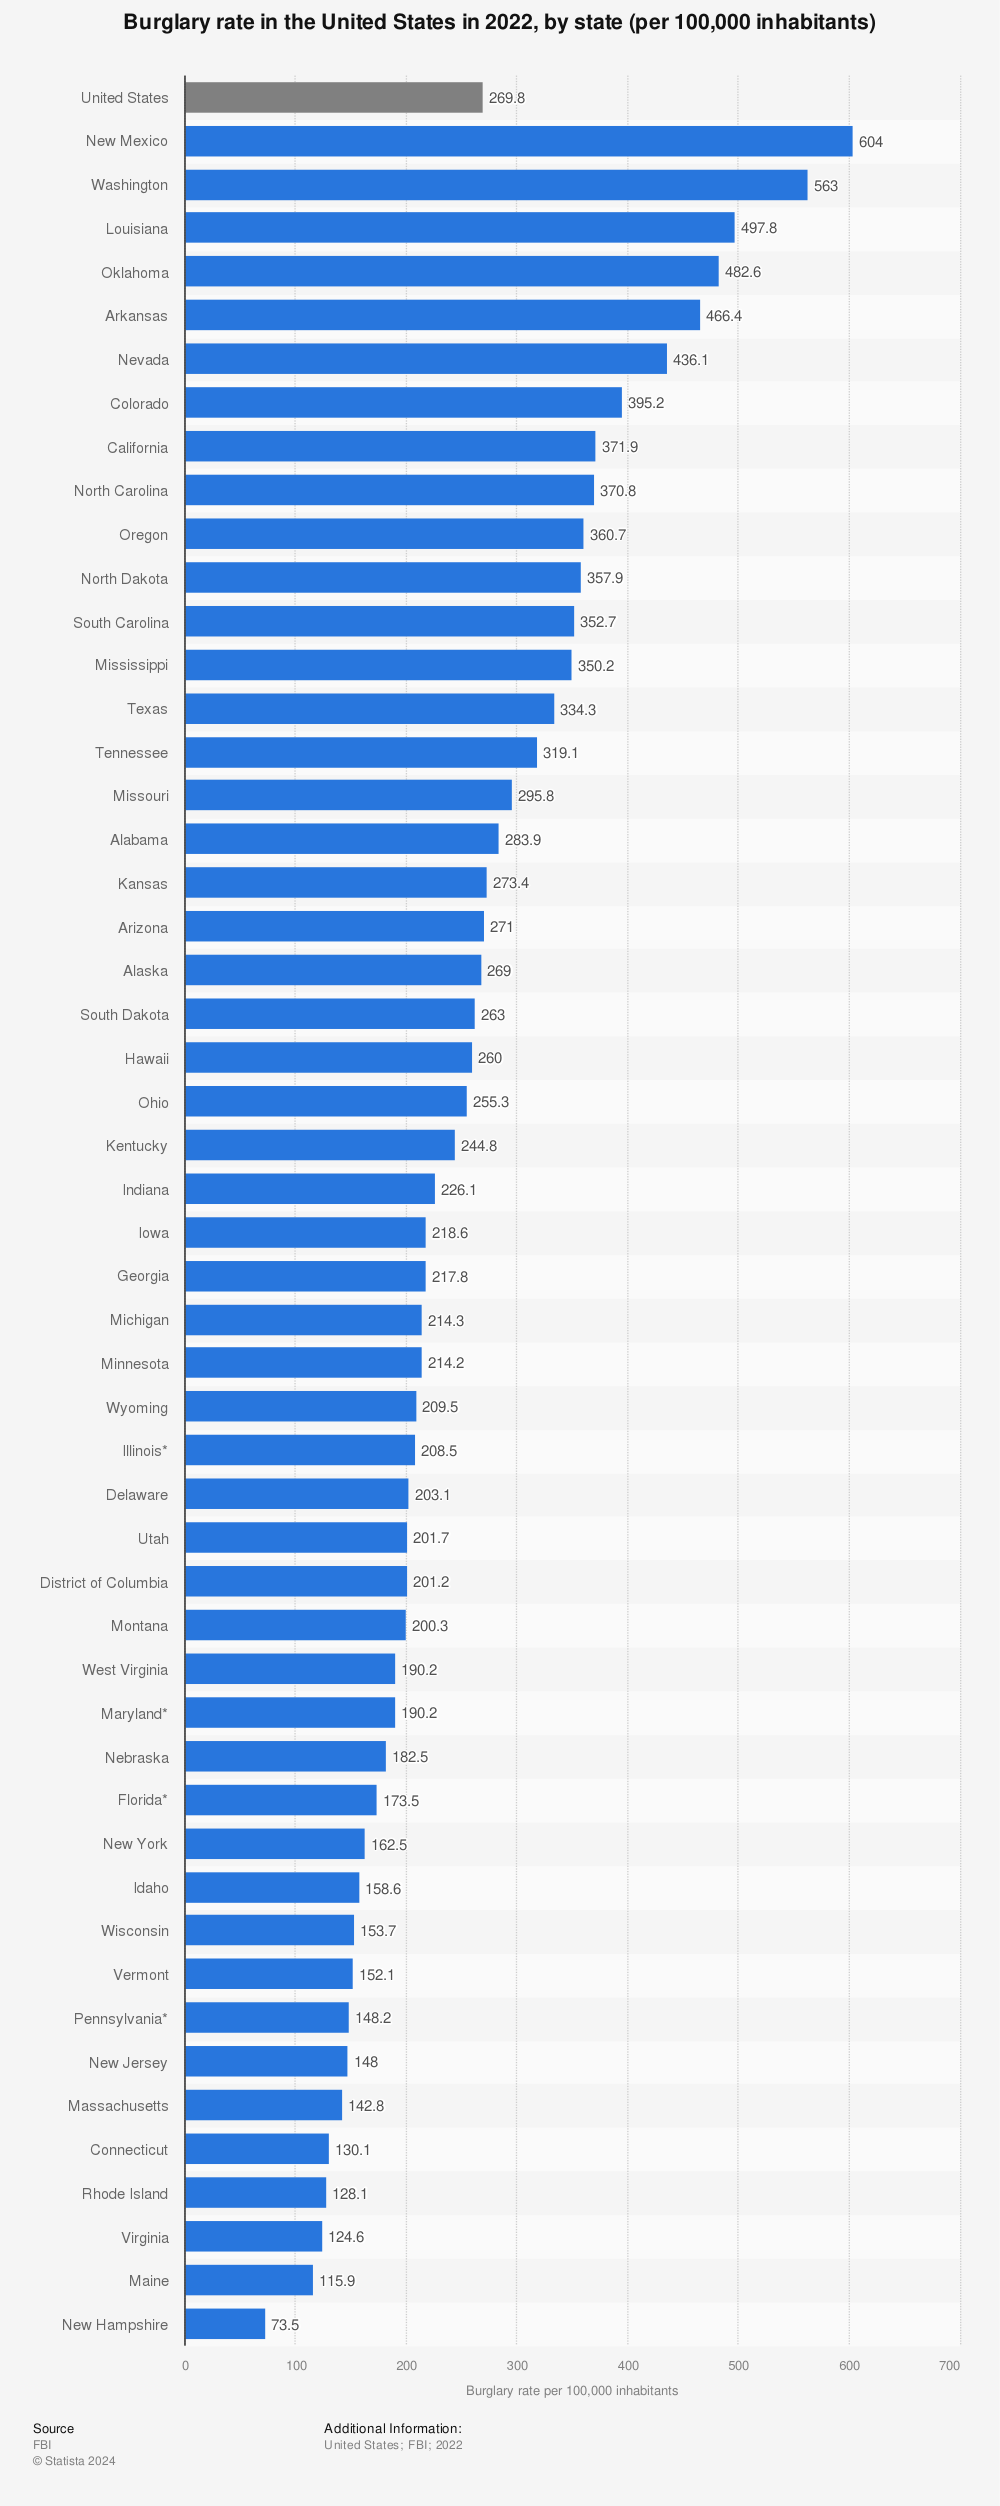 Statistic: Burglary rate in the United States in 2020, by state (per 100,000 inhabitants) | Statista